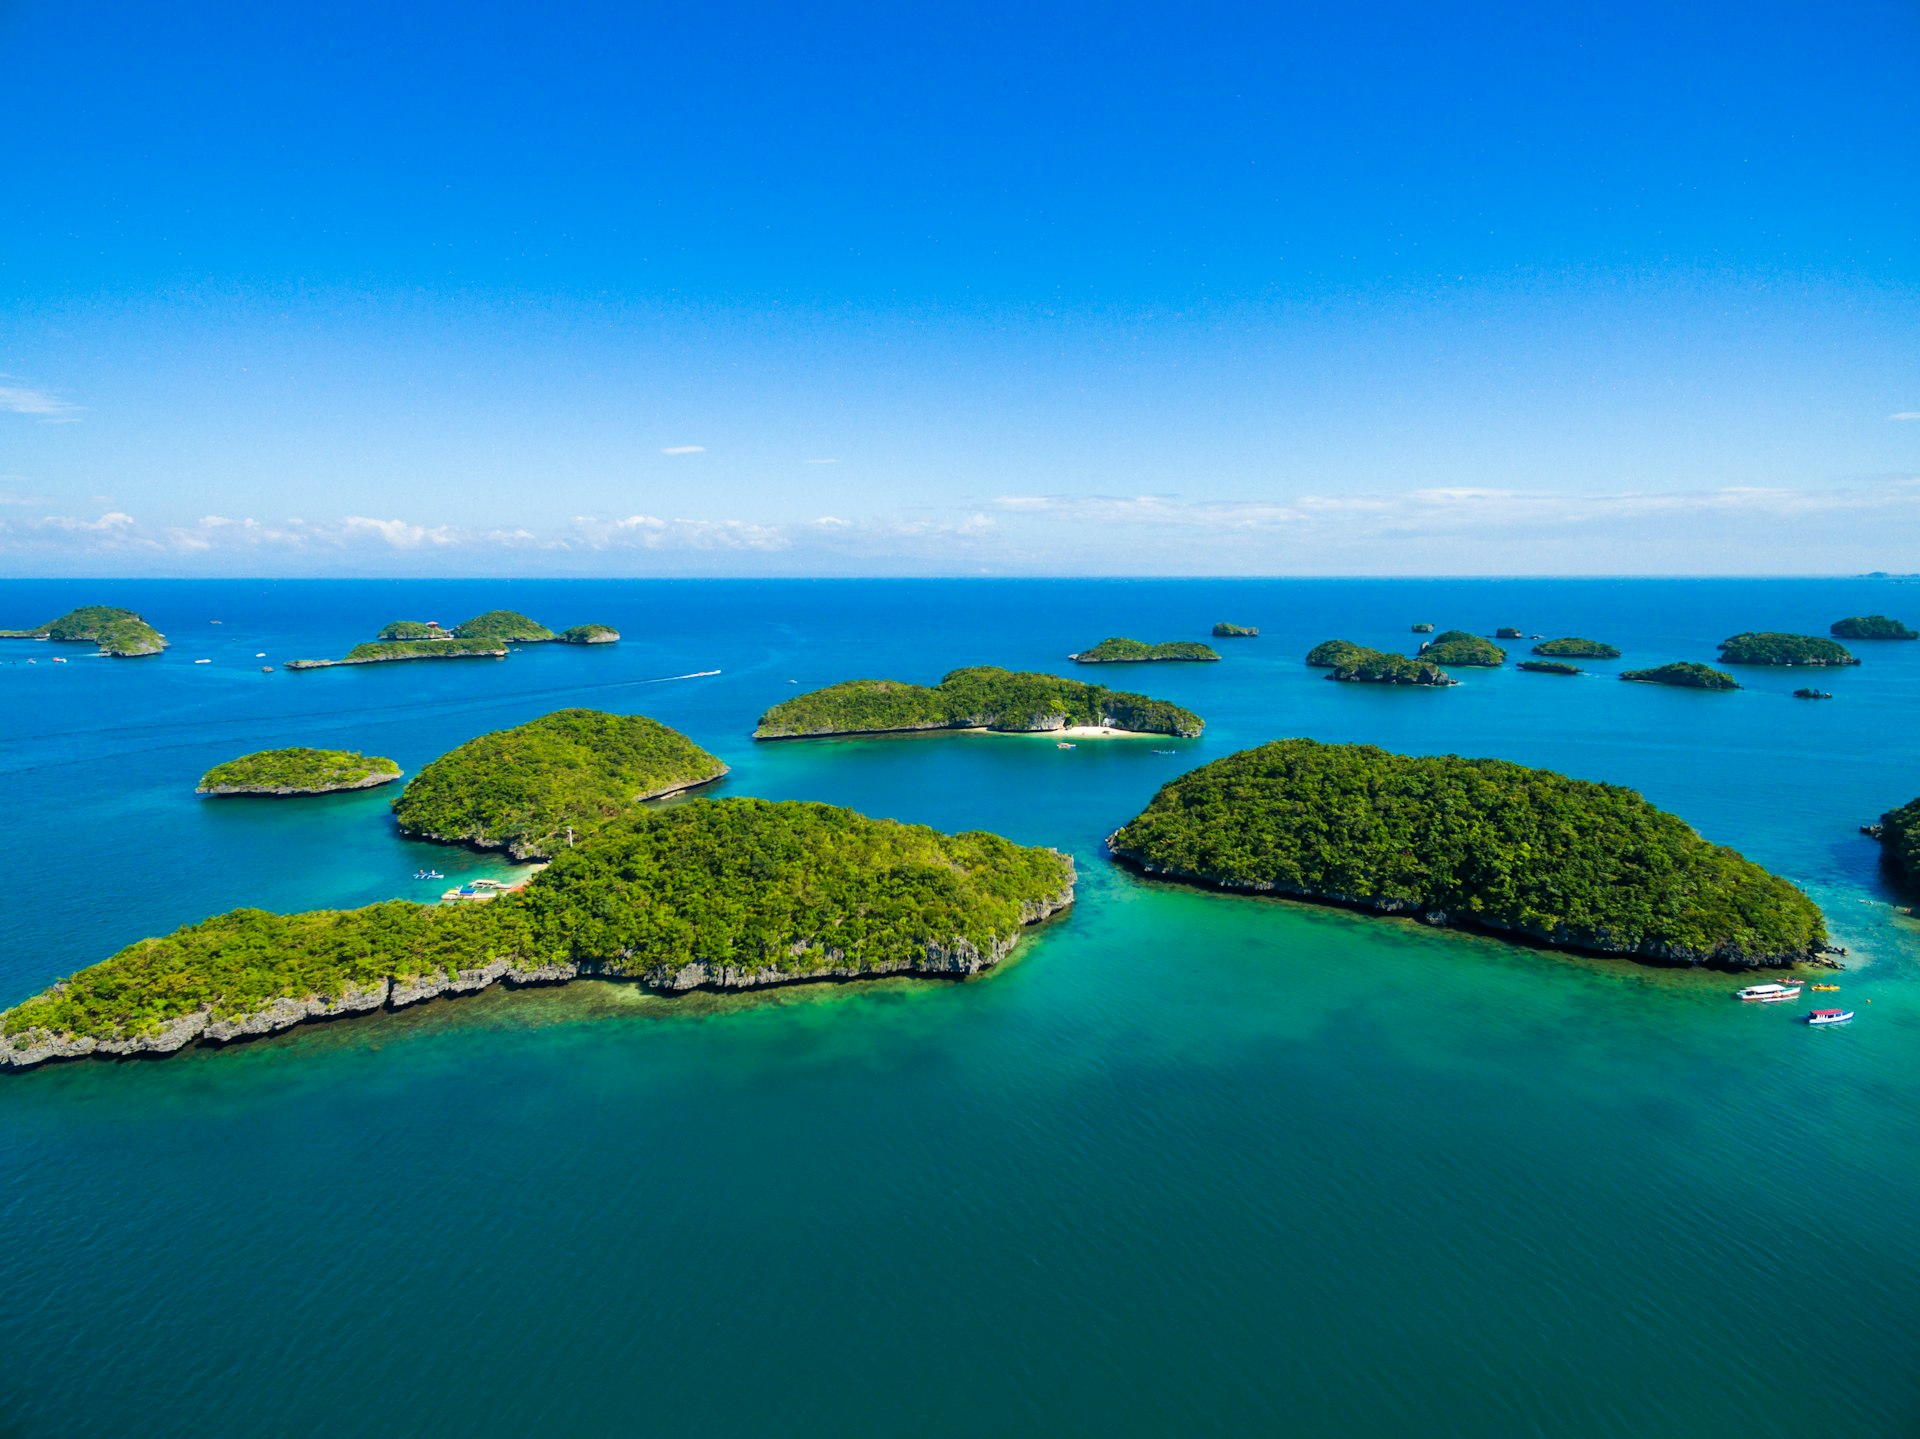 Philippines hundred islands national park holgs GettyImages-658867156 RFC.jpg